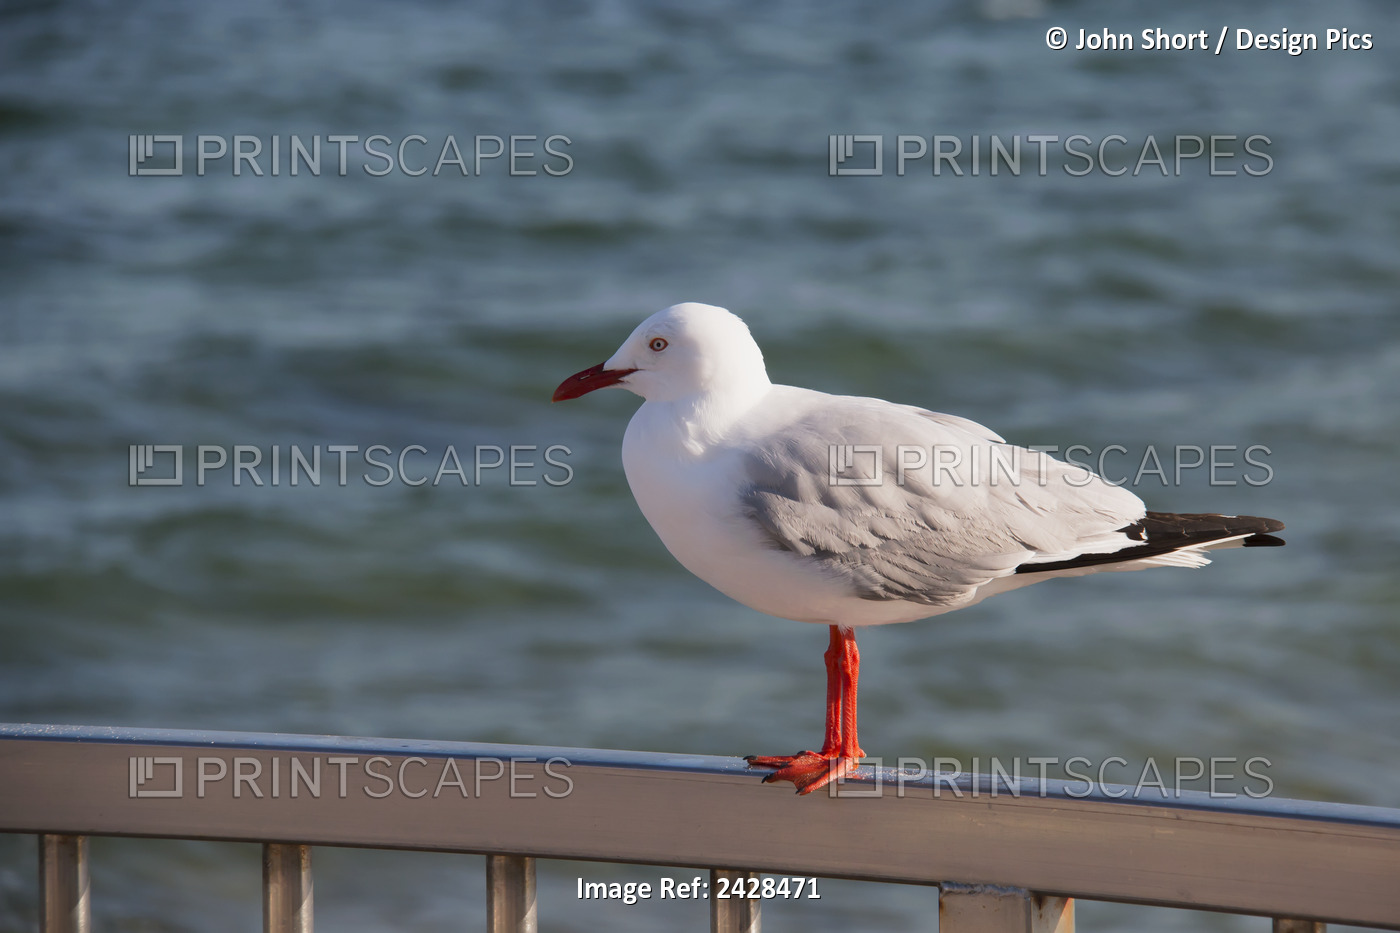 Bird Perched On A Railing At The Water's Edge; Brisbane, Queensland, Australia